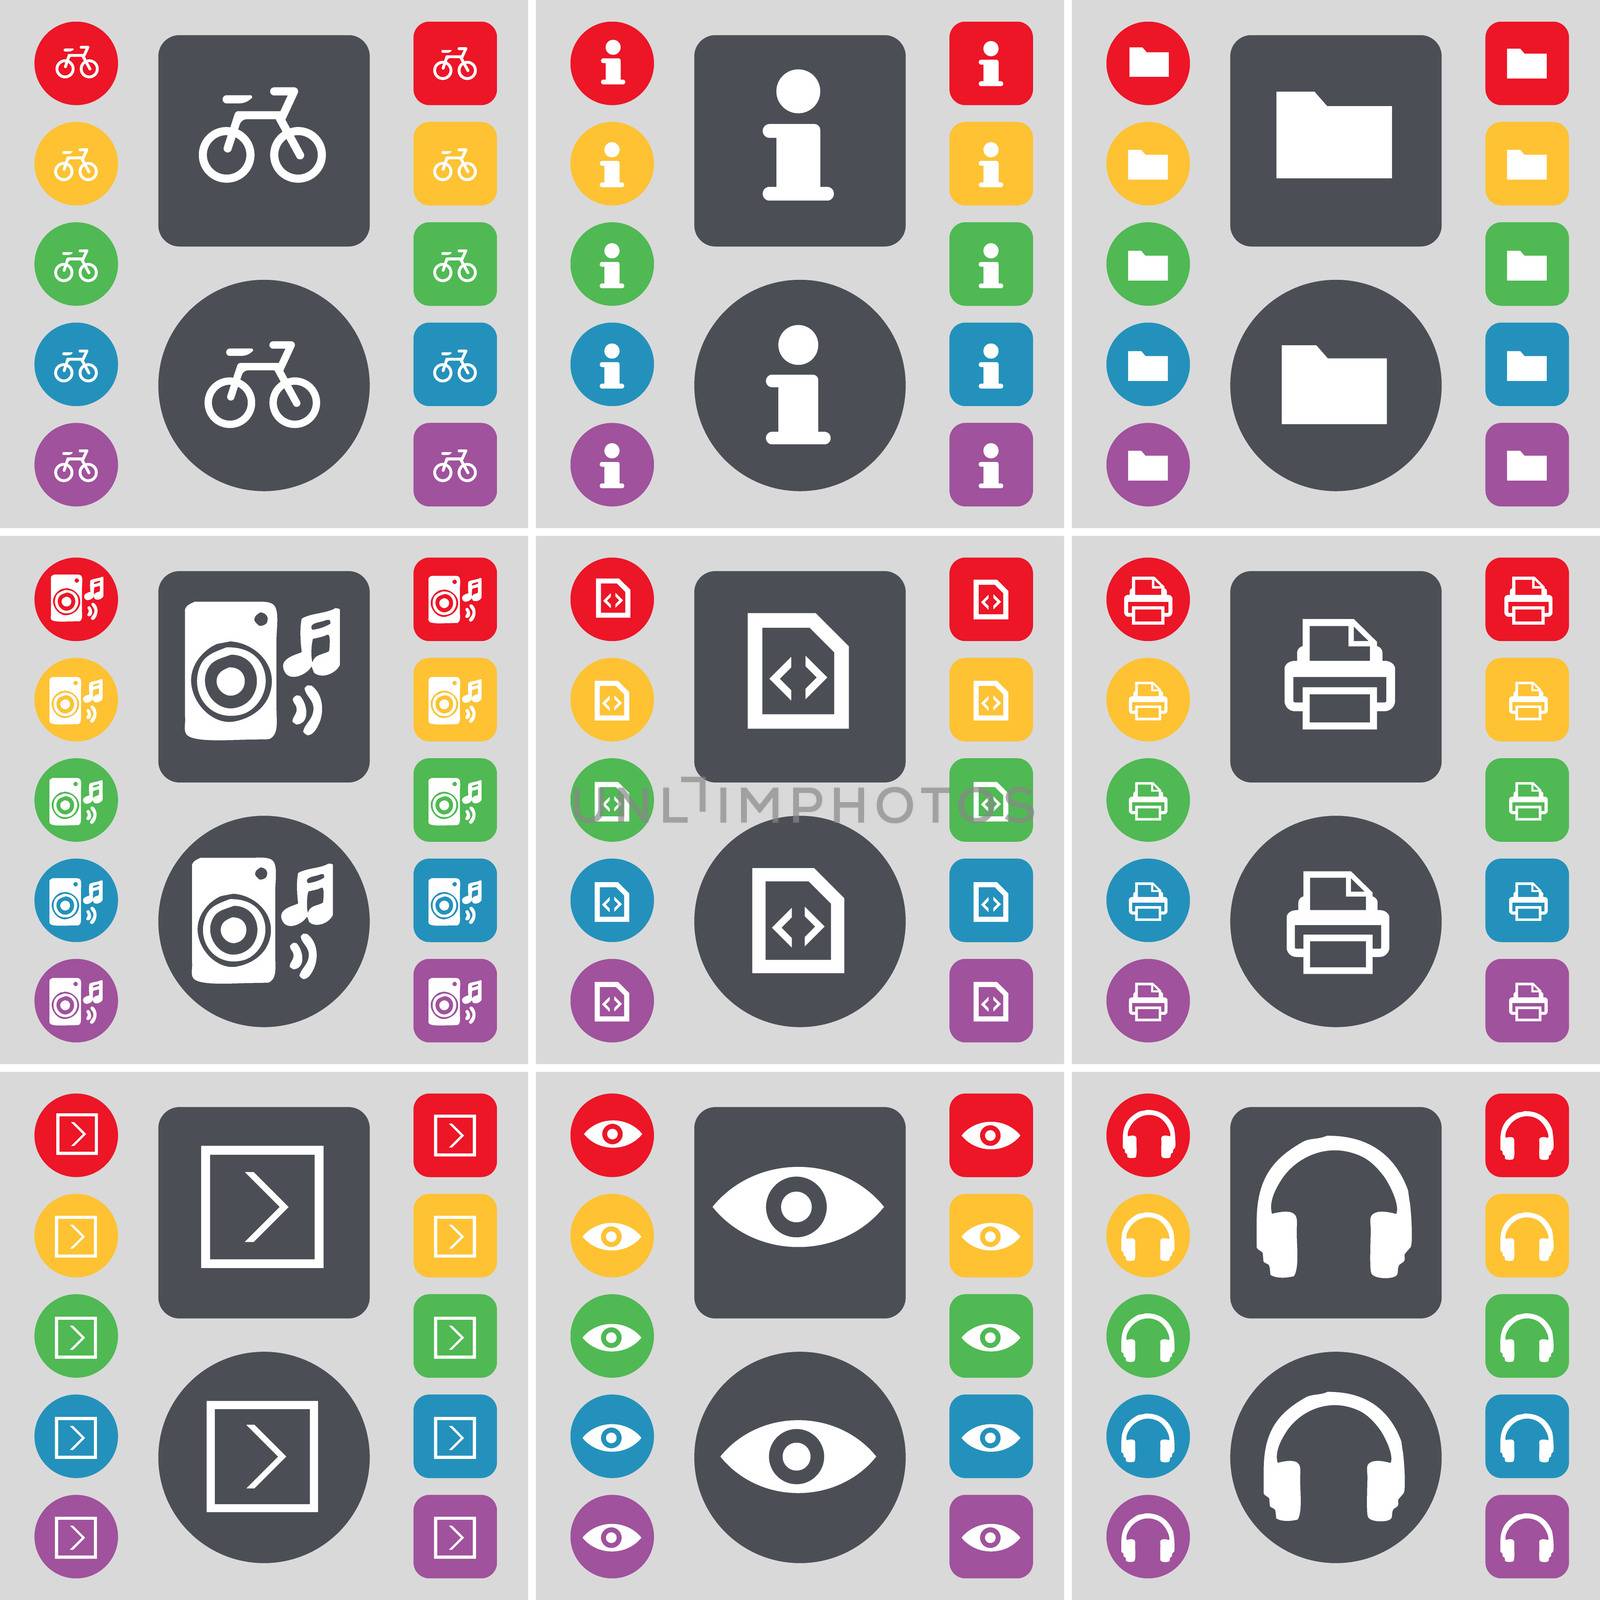 Bicycle, Information, Folder, Speaker, File, Printer, Arrowr right, Vision, Headphones icon symbol. A large set of flat, colored buttons for your design.  by serhii_lohvyniuk